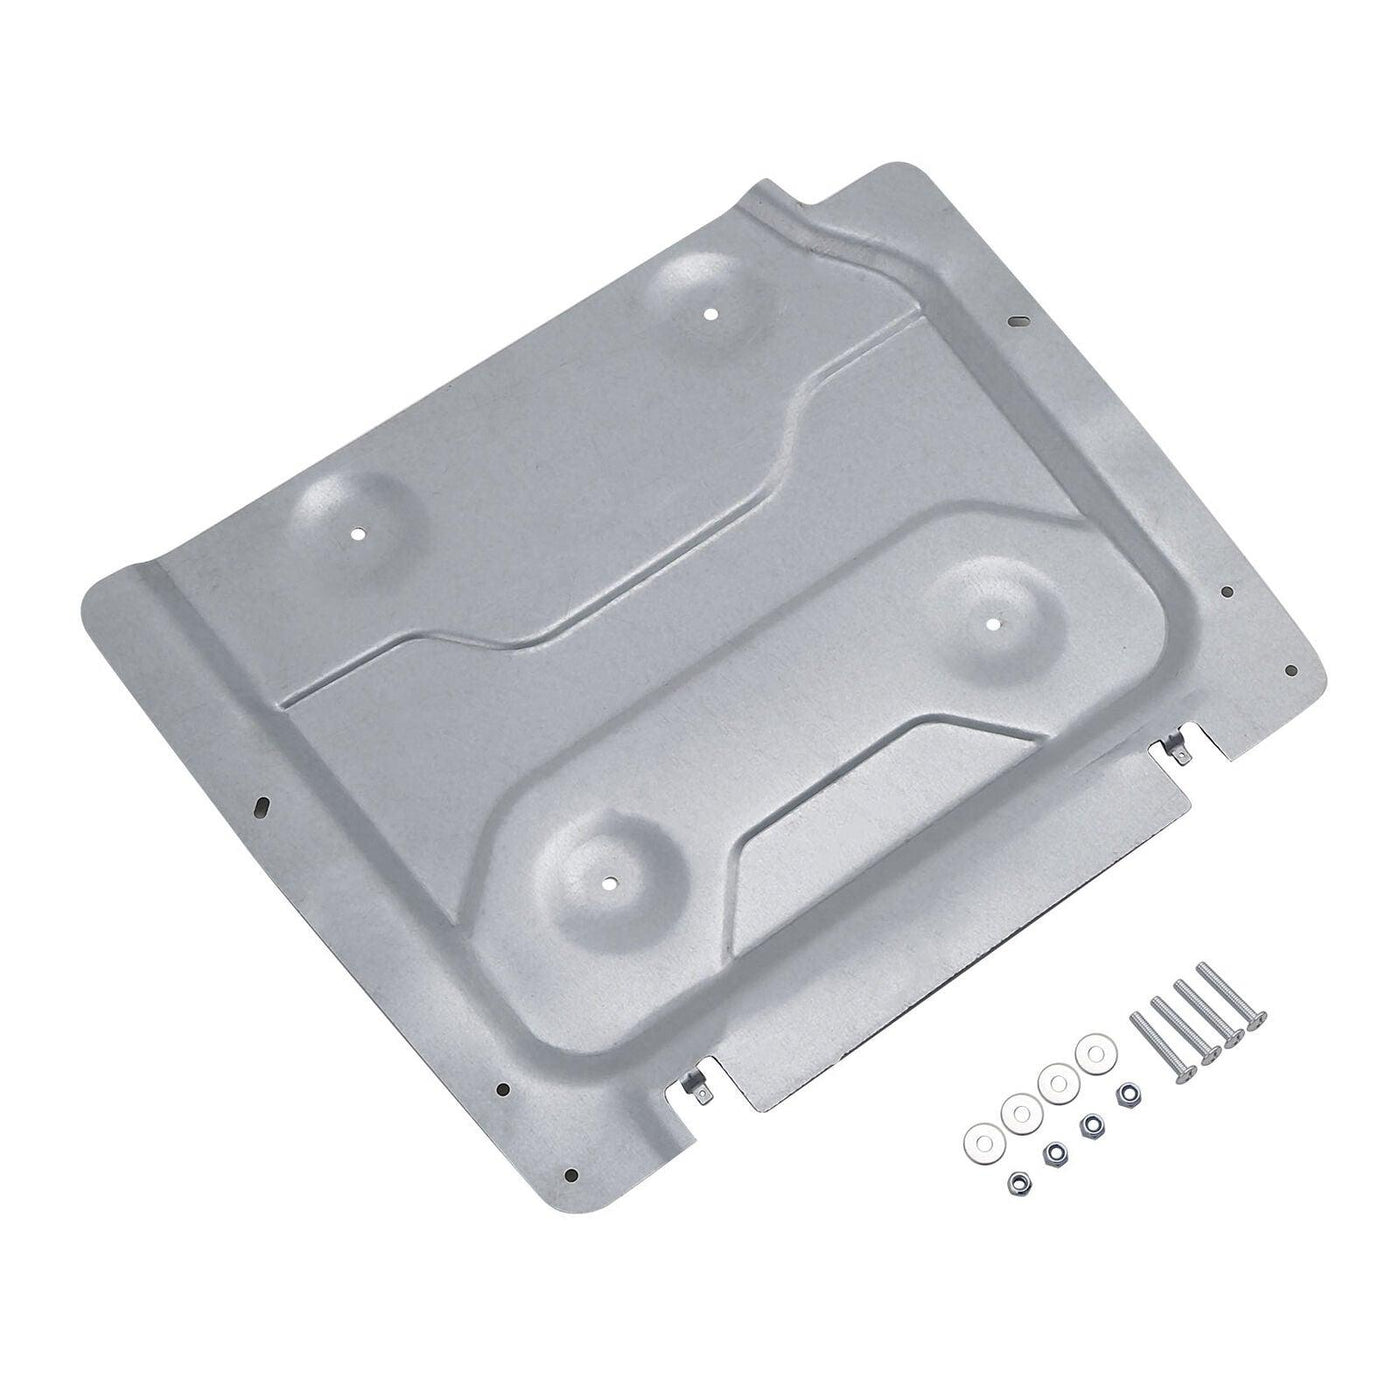 Pack Trunk Base Plate Fit For Harley Tour Pak Touring Street Glide 2014-2022 21 - Moto Life Products